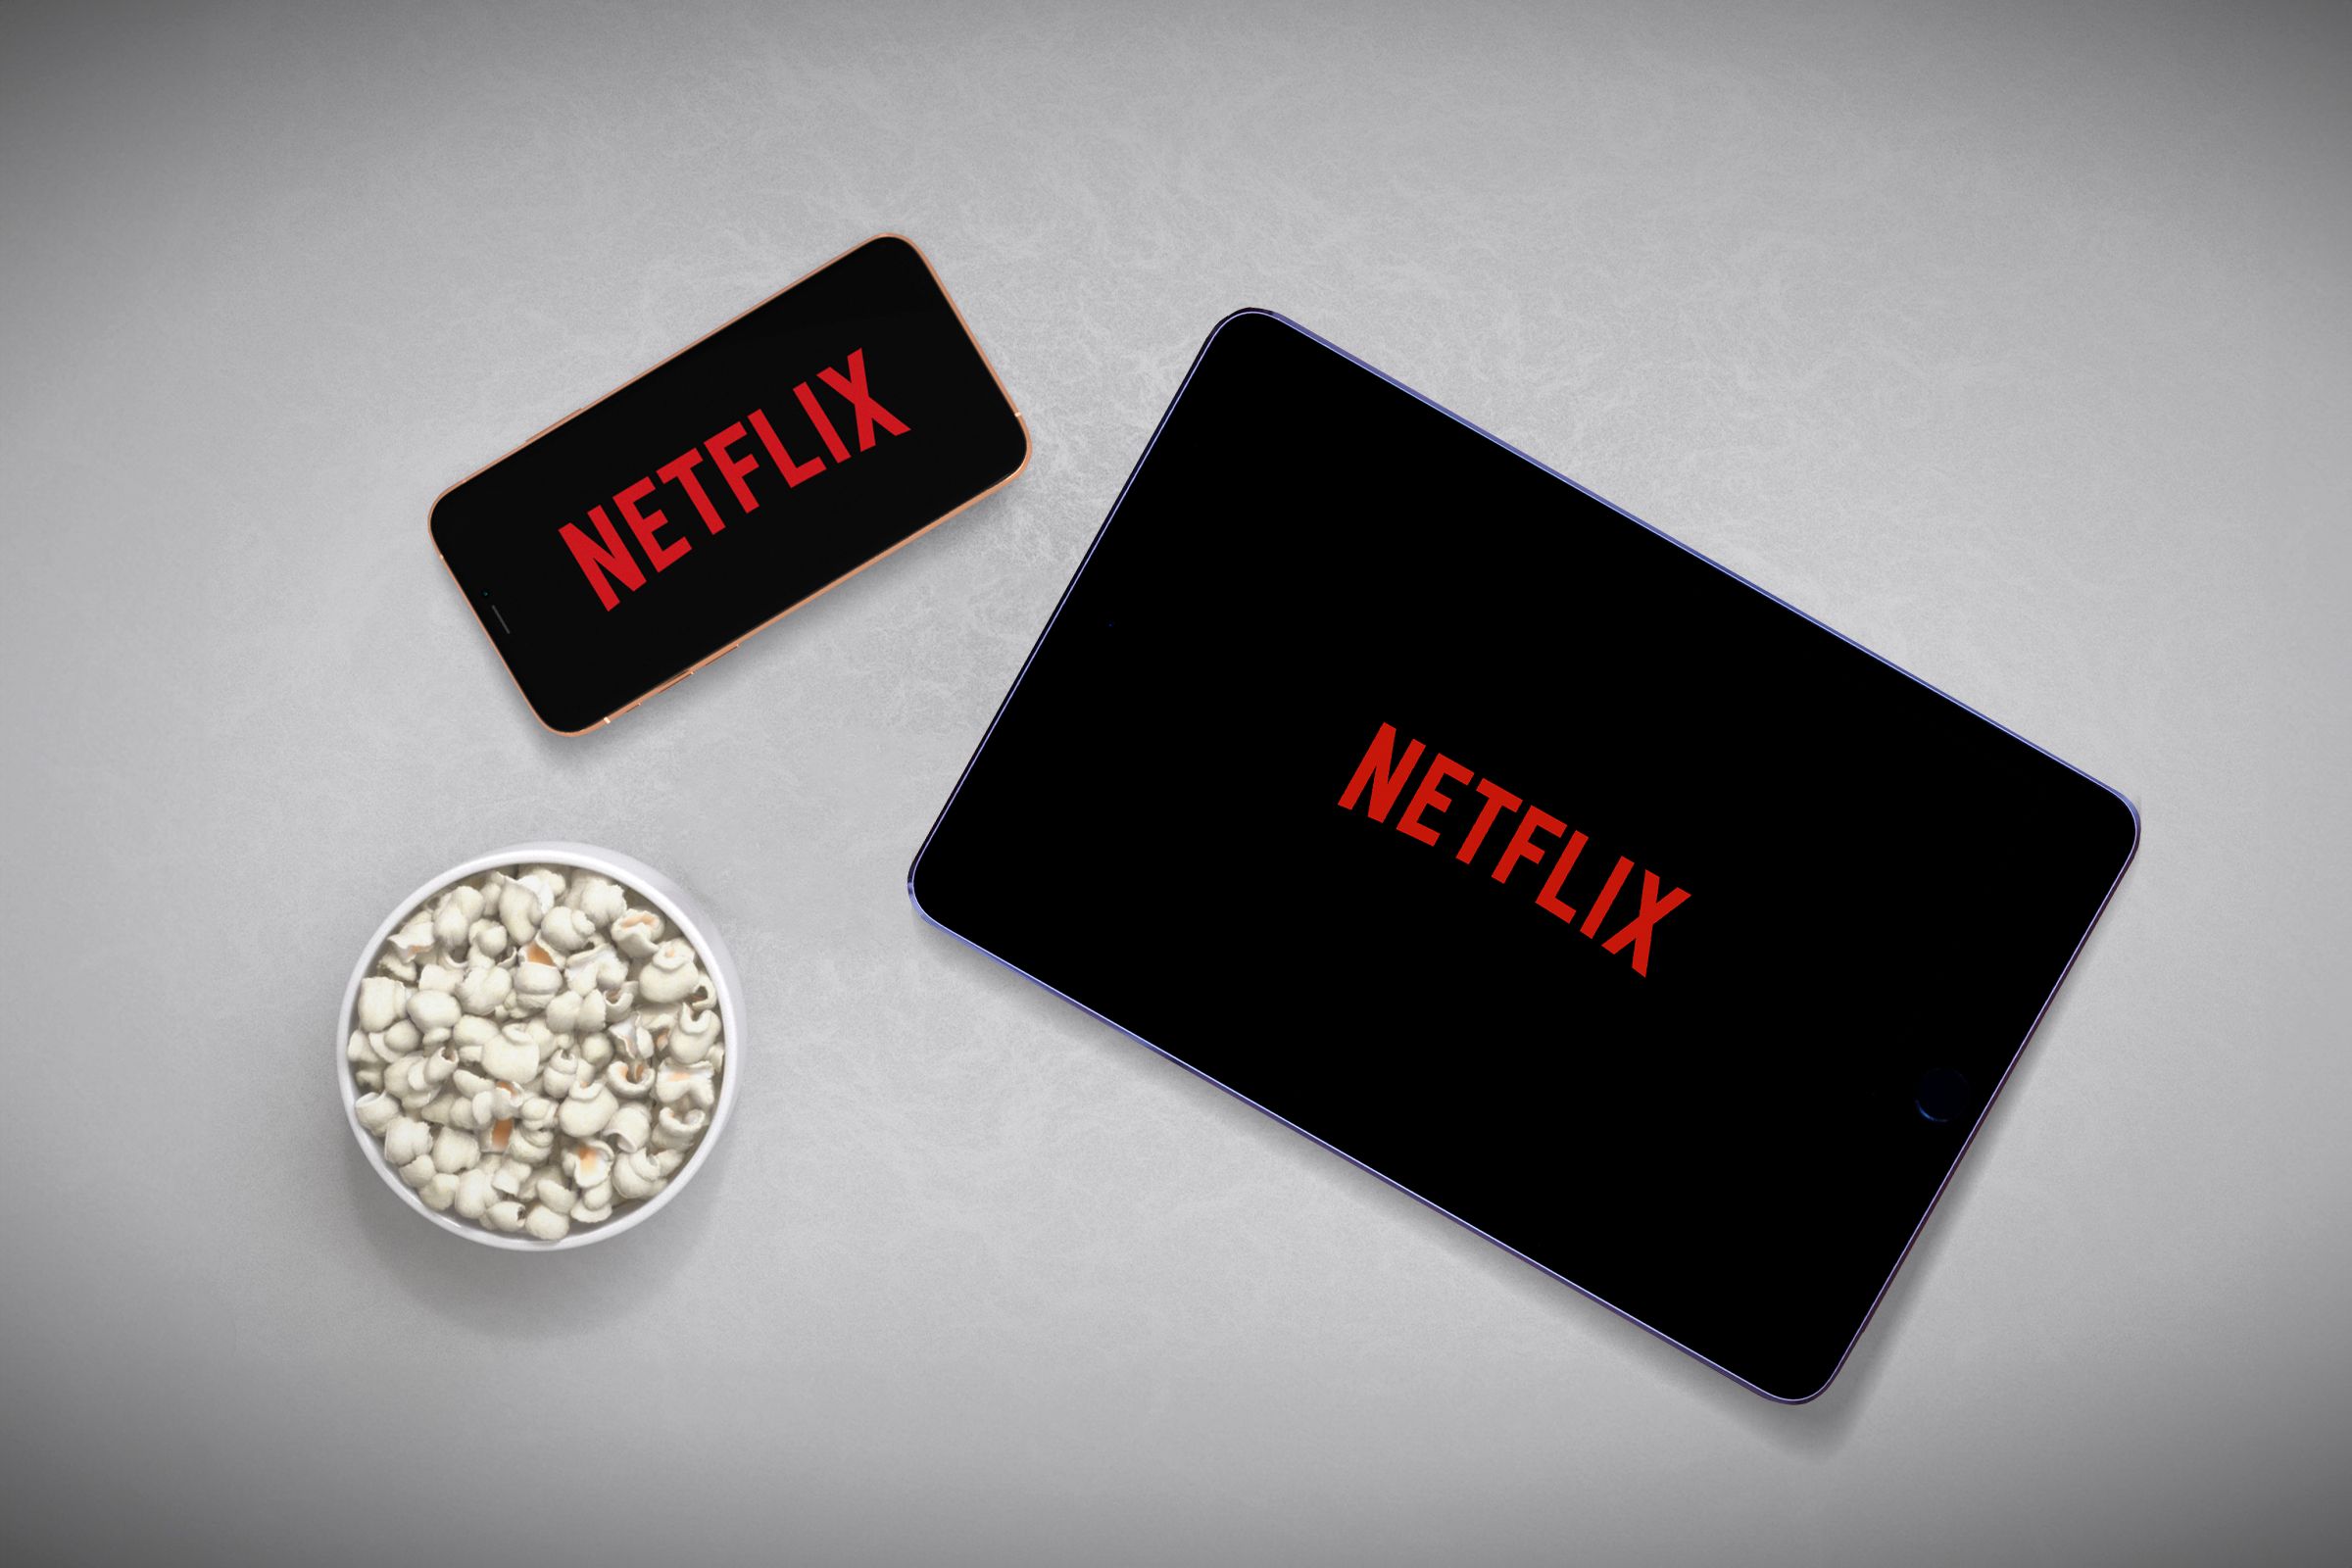 A smartphone on the left and a tablet on the right, both with the Netflix logo on the screen, and a bowl of popcorn in the bottom left corner